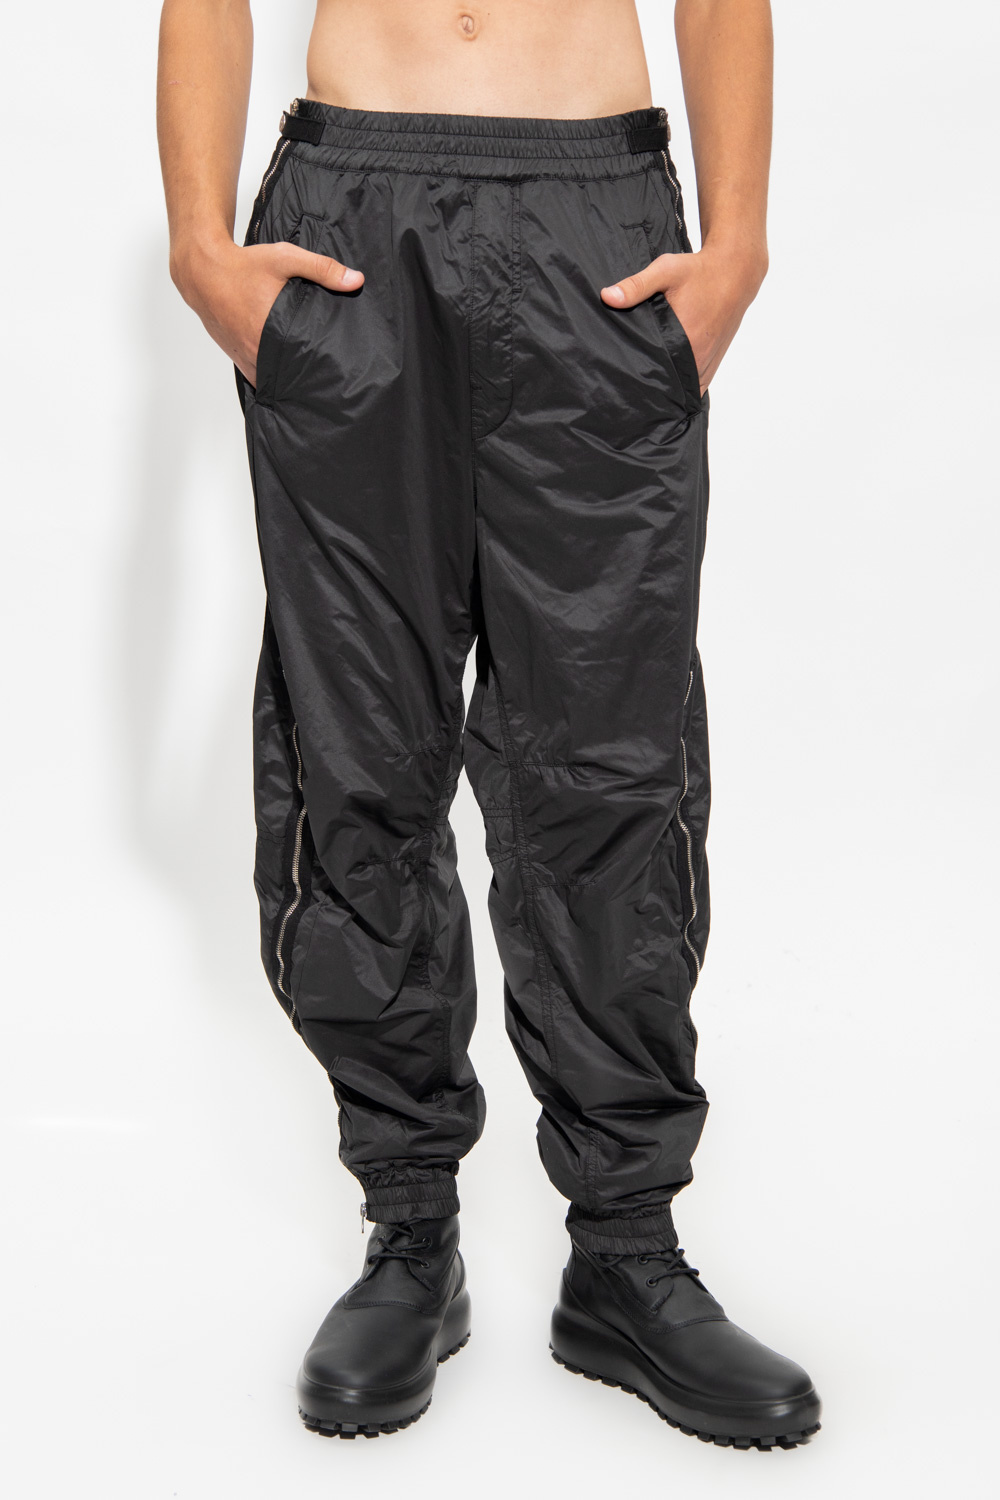 Stone Island Insulated trousers with zips